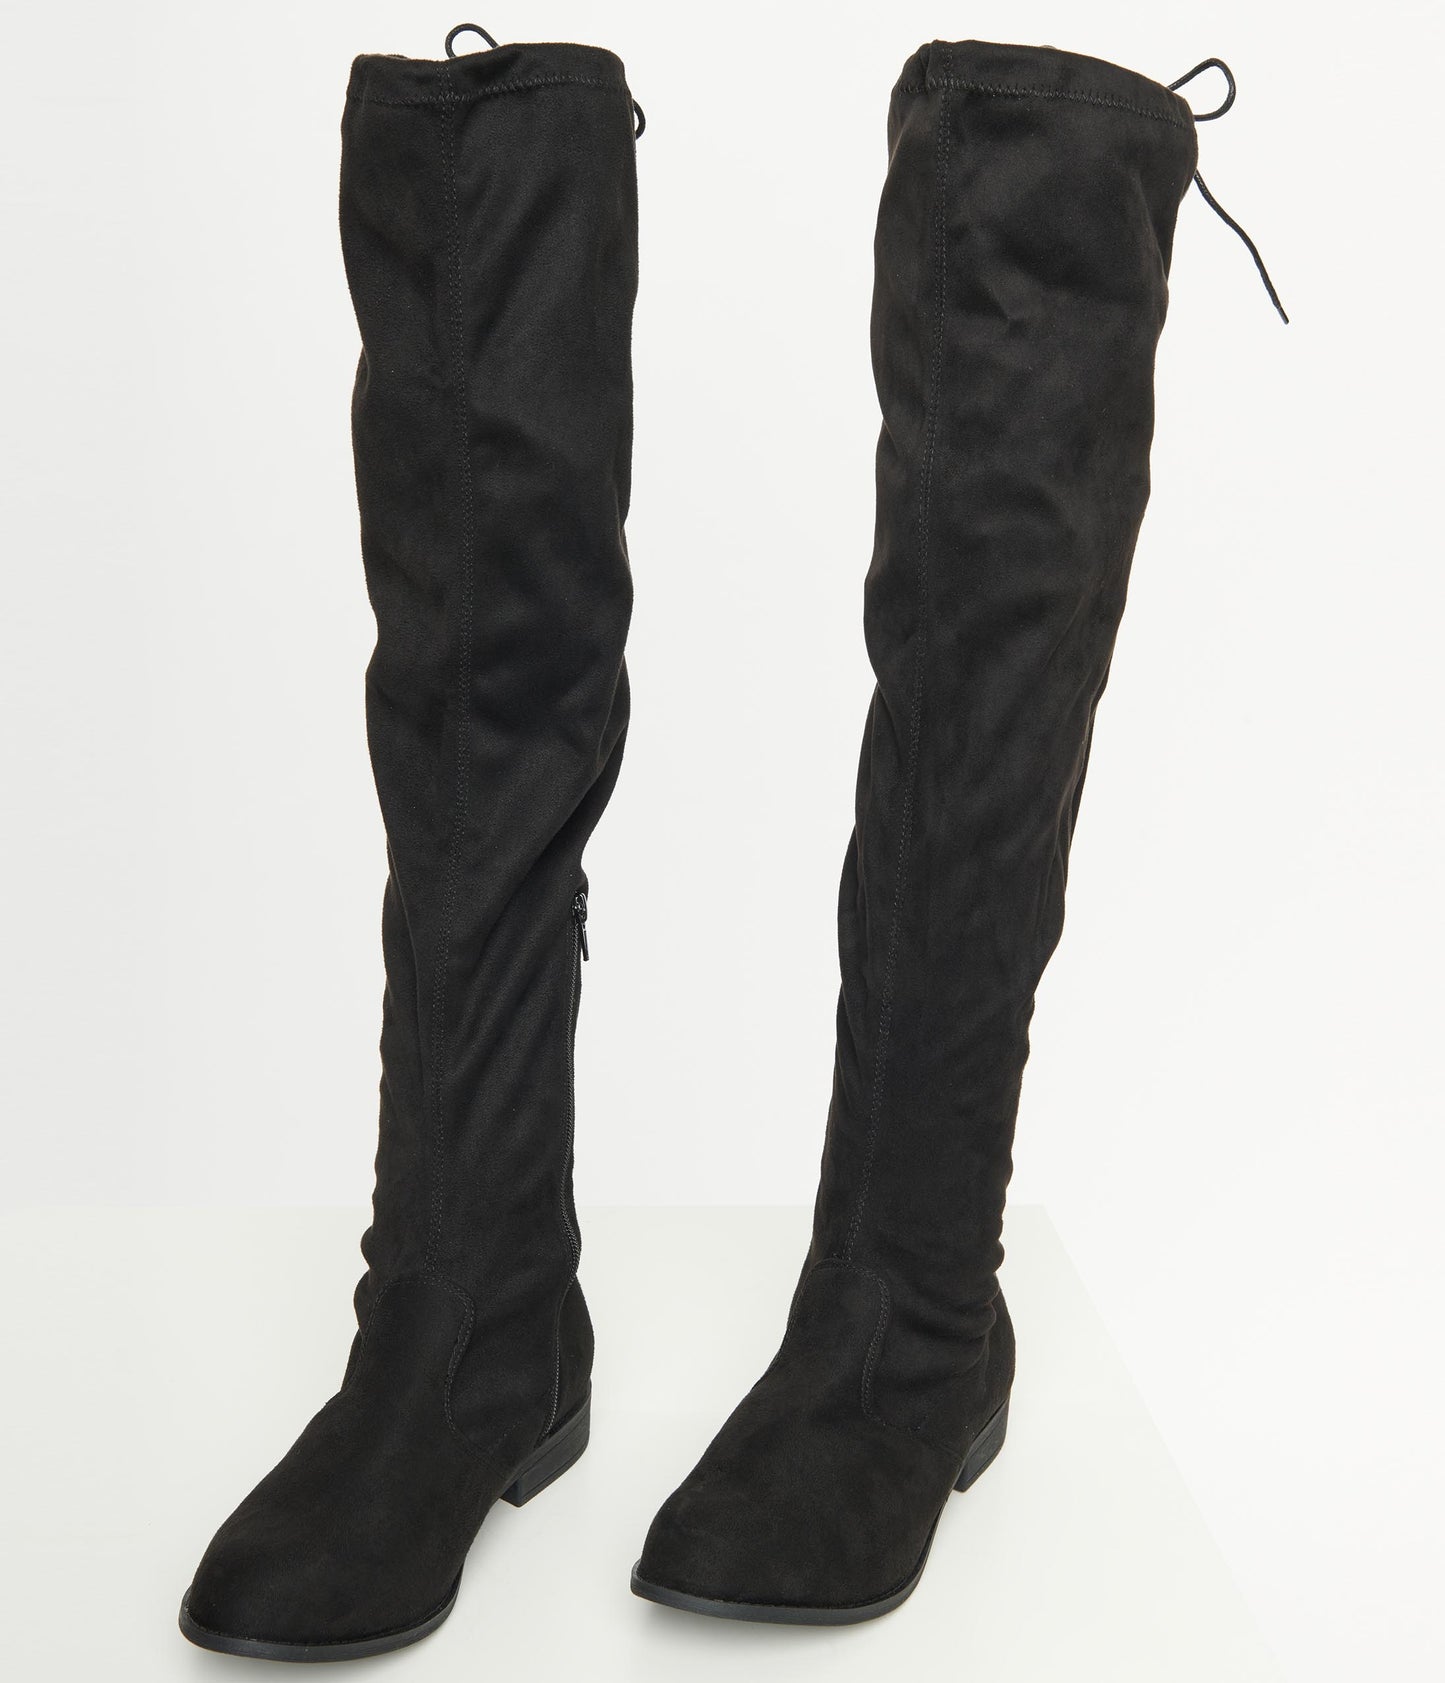 Black Suede Thigh-High Boots